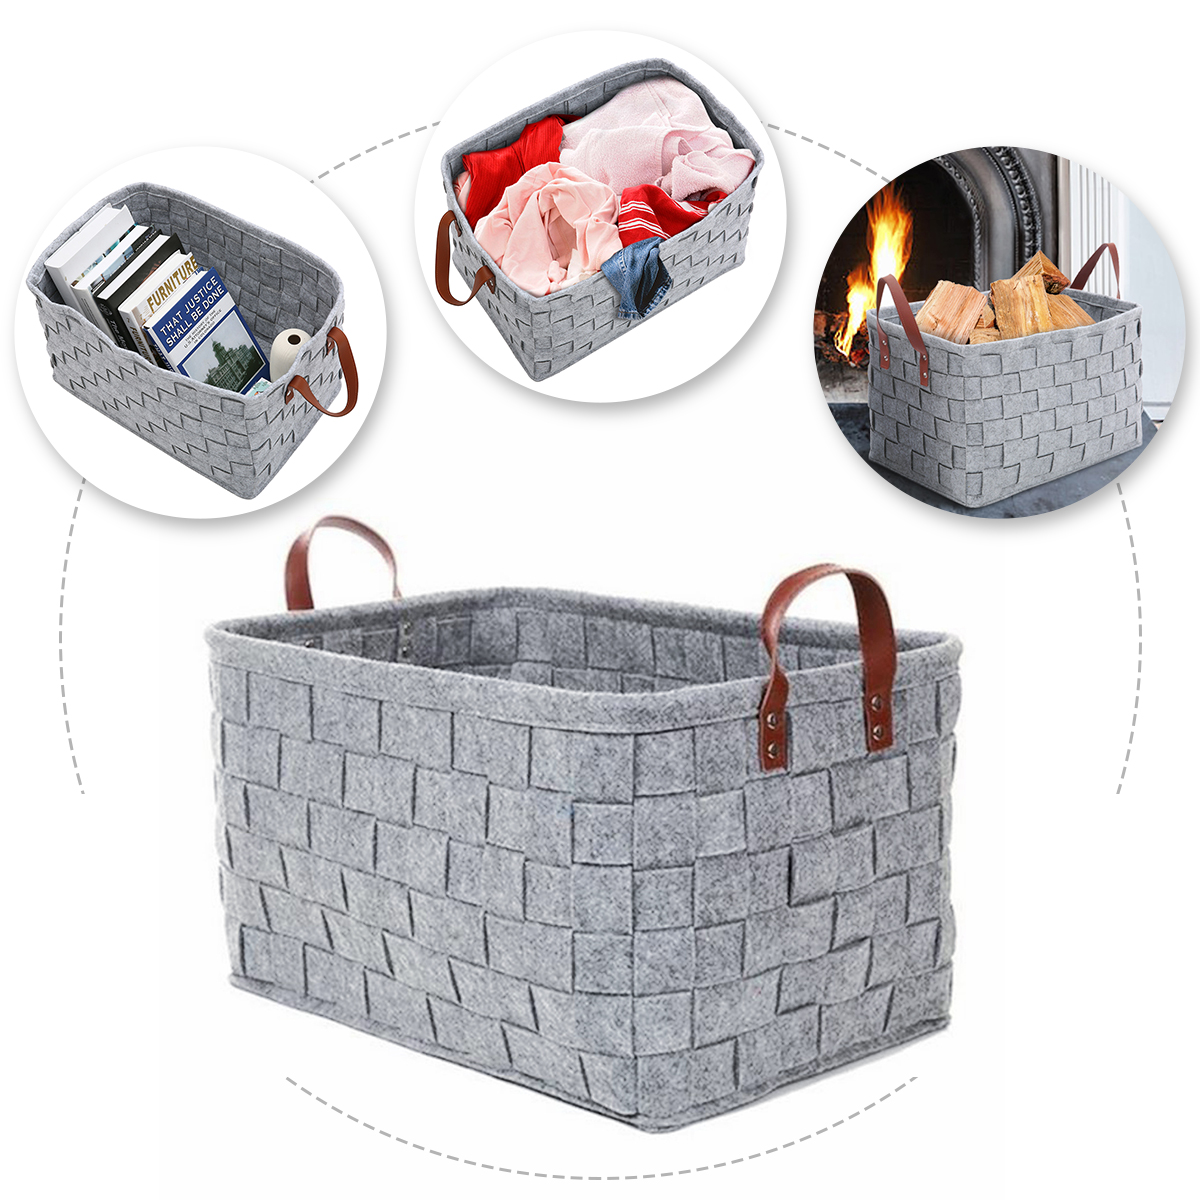 

Woven Storage Baskets Essort Grey Felt Clothes Storage Box Woven Storage Bin Firewood Basket Garment Basket with Handle for Toys